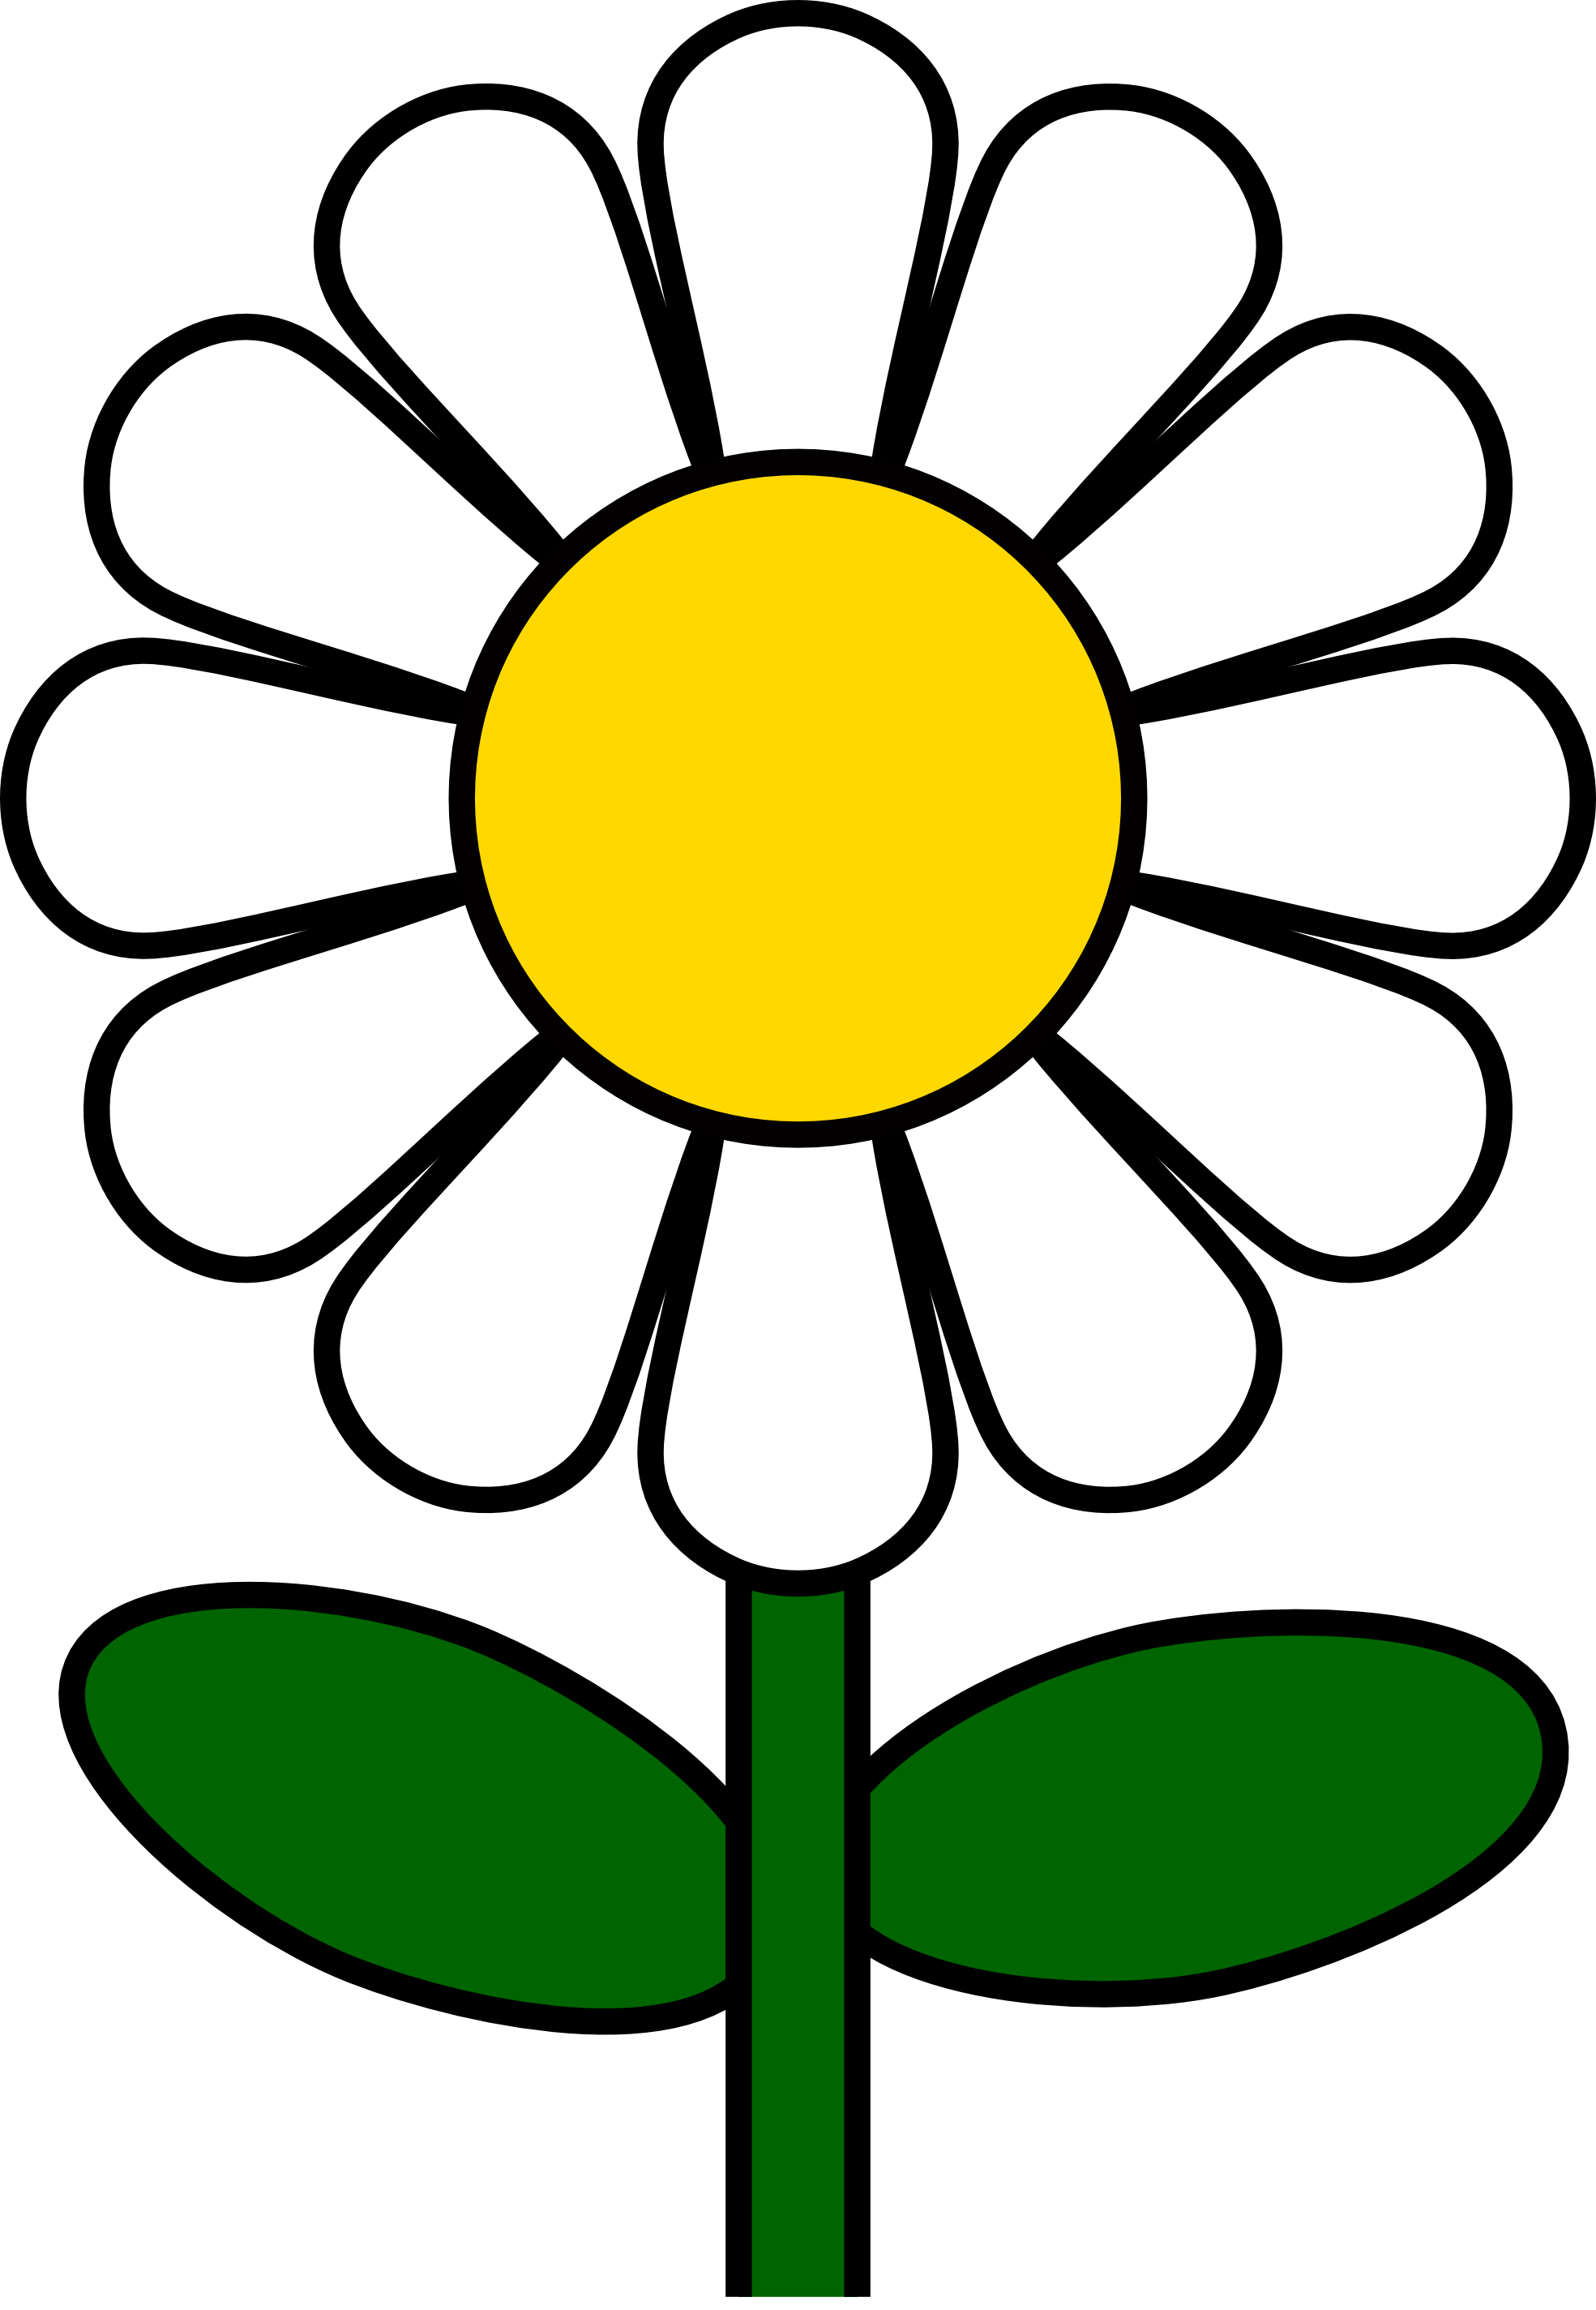 Daisy clip art free free clipart images